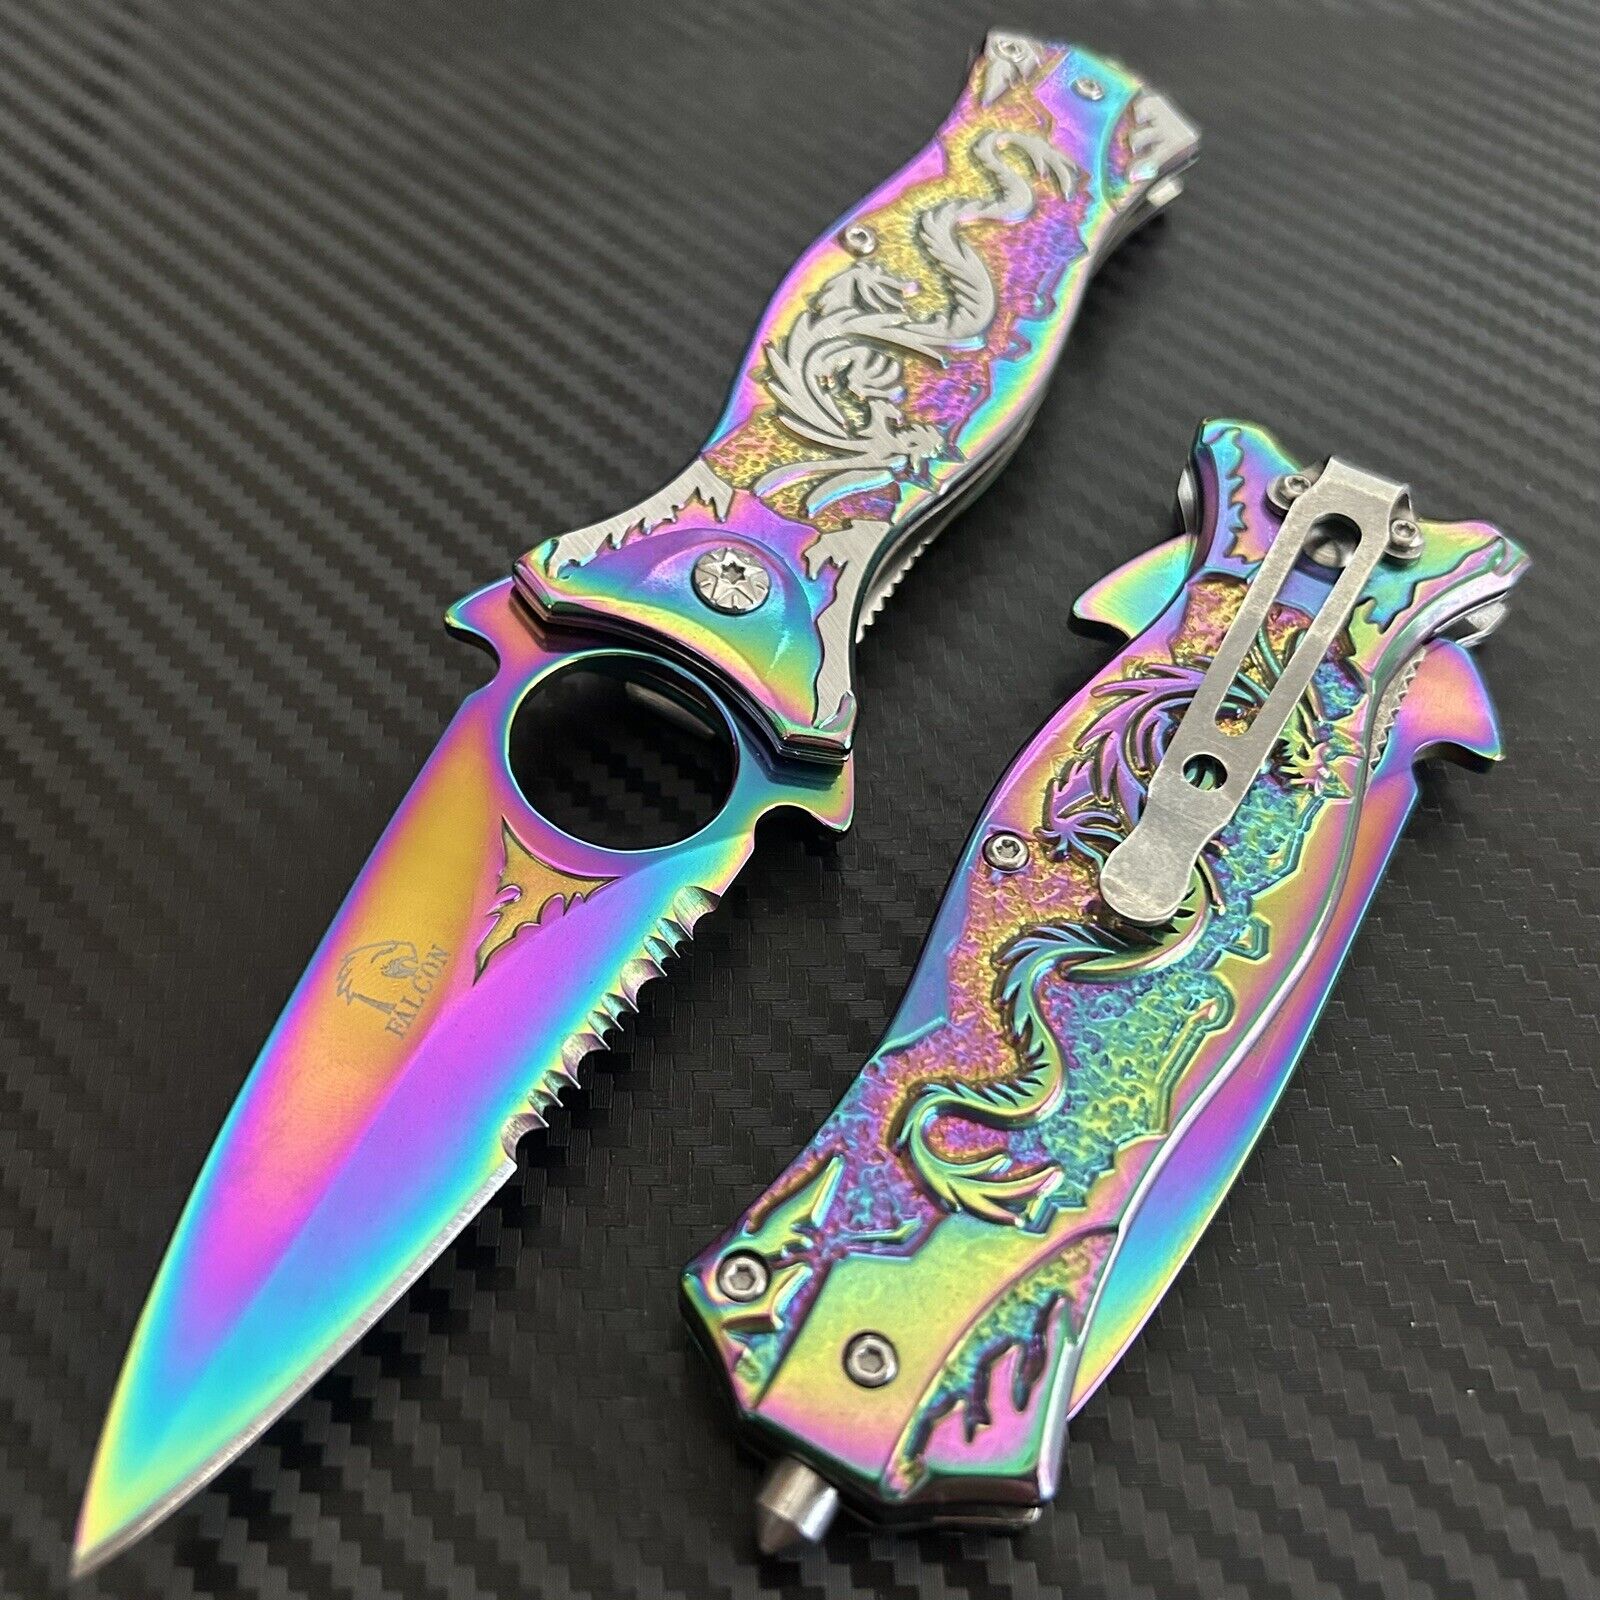 8” Rainbow Dragon Tactical Spring Assisted Open Folding Pocket Knife Hunting